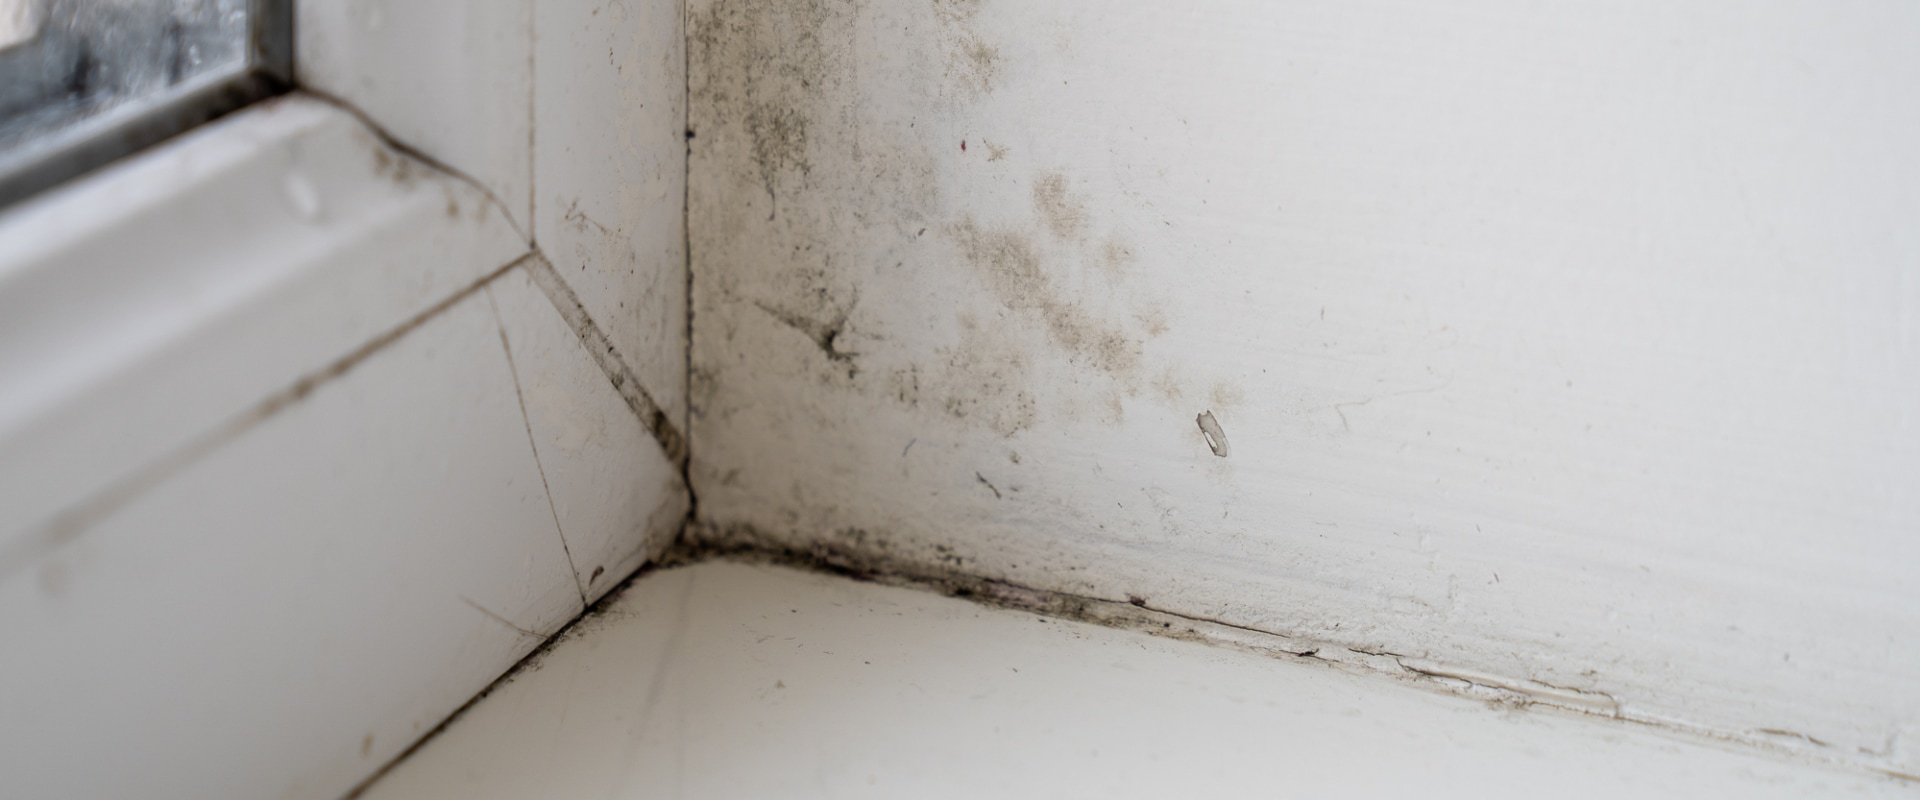 How do you test if mold is making you sick?